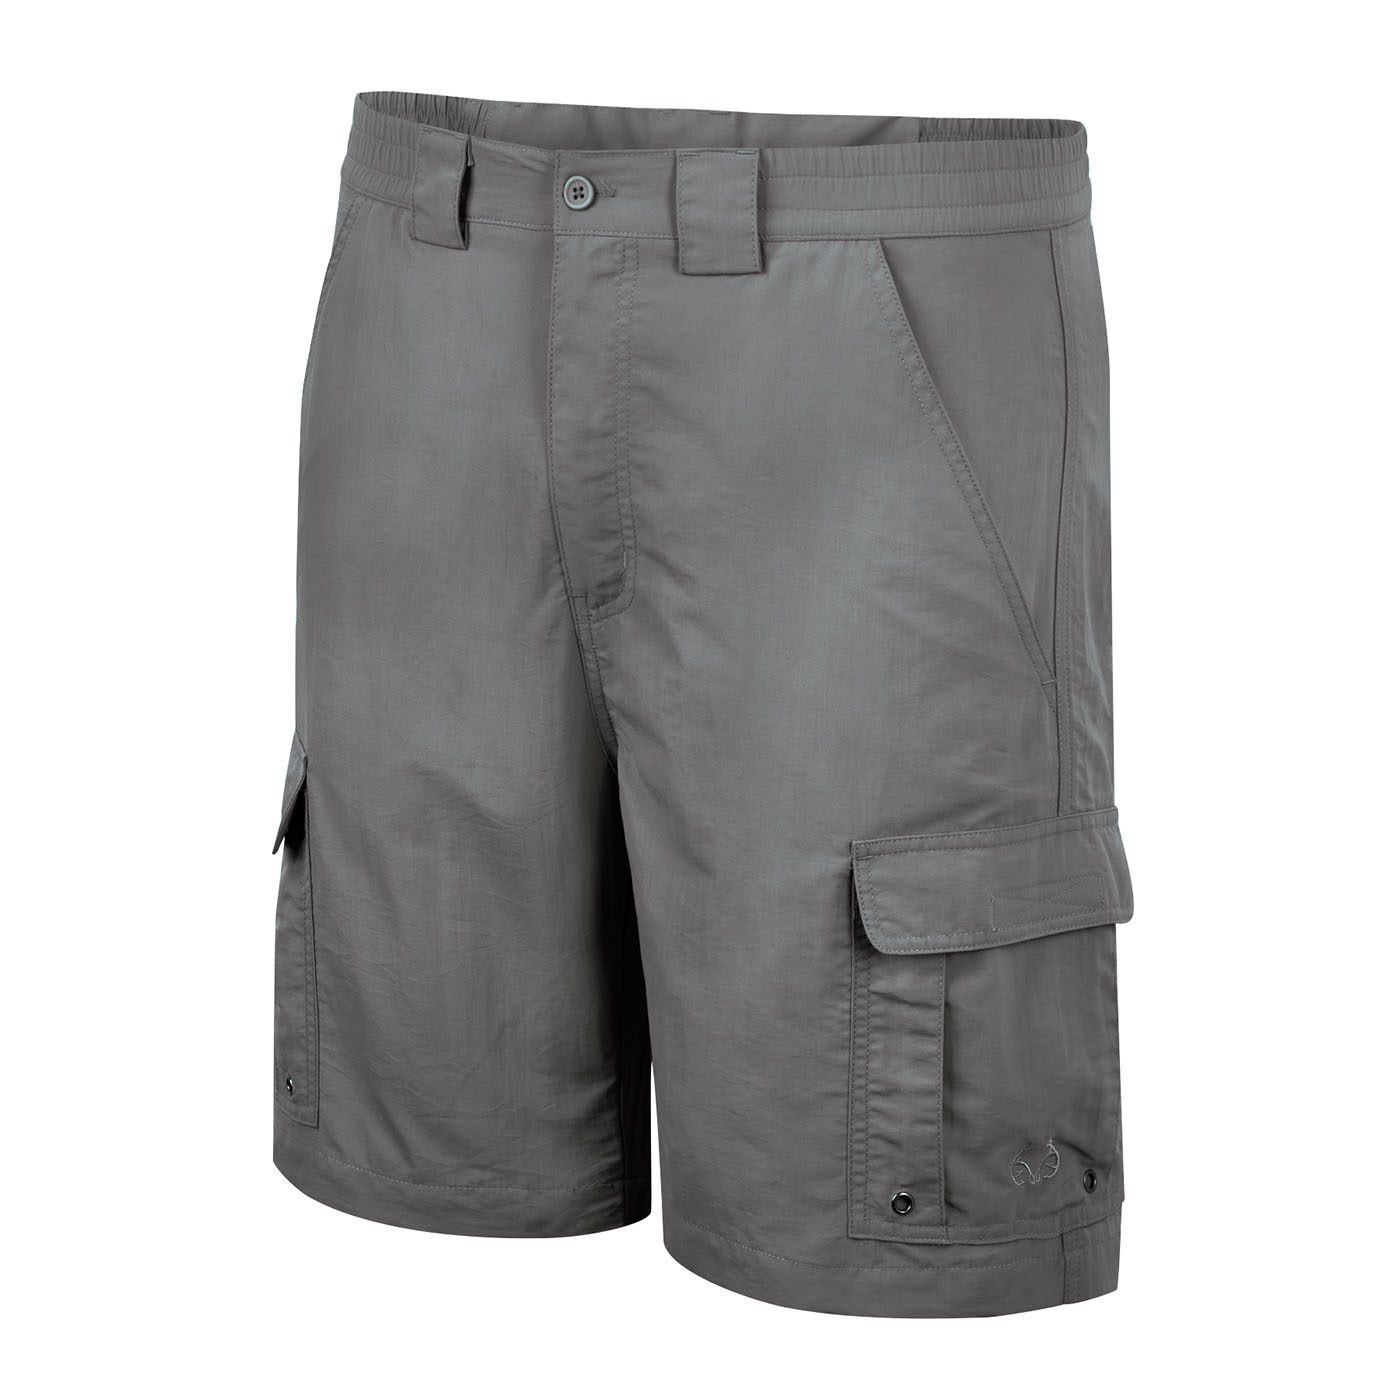 hook tackle shorts products for sale